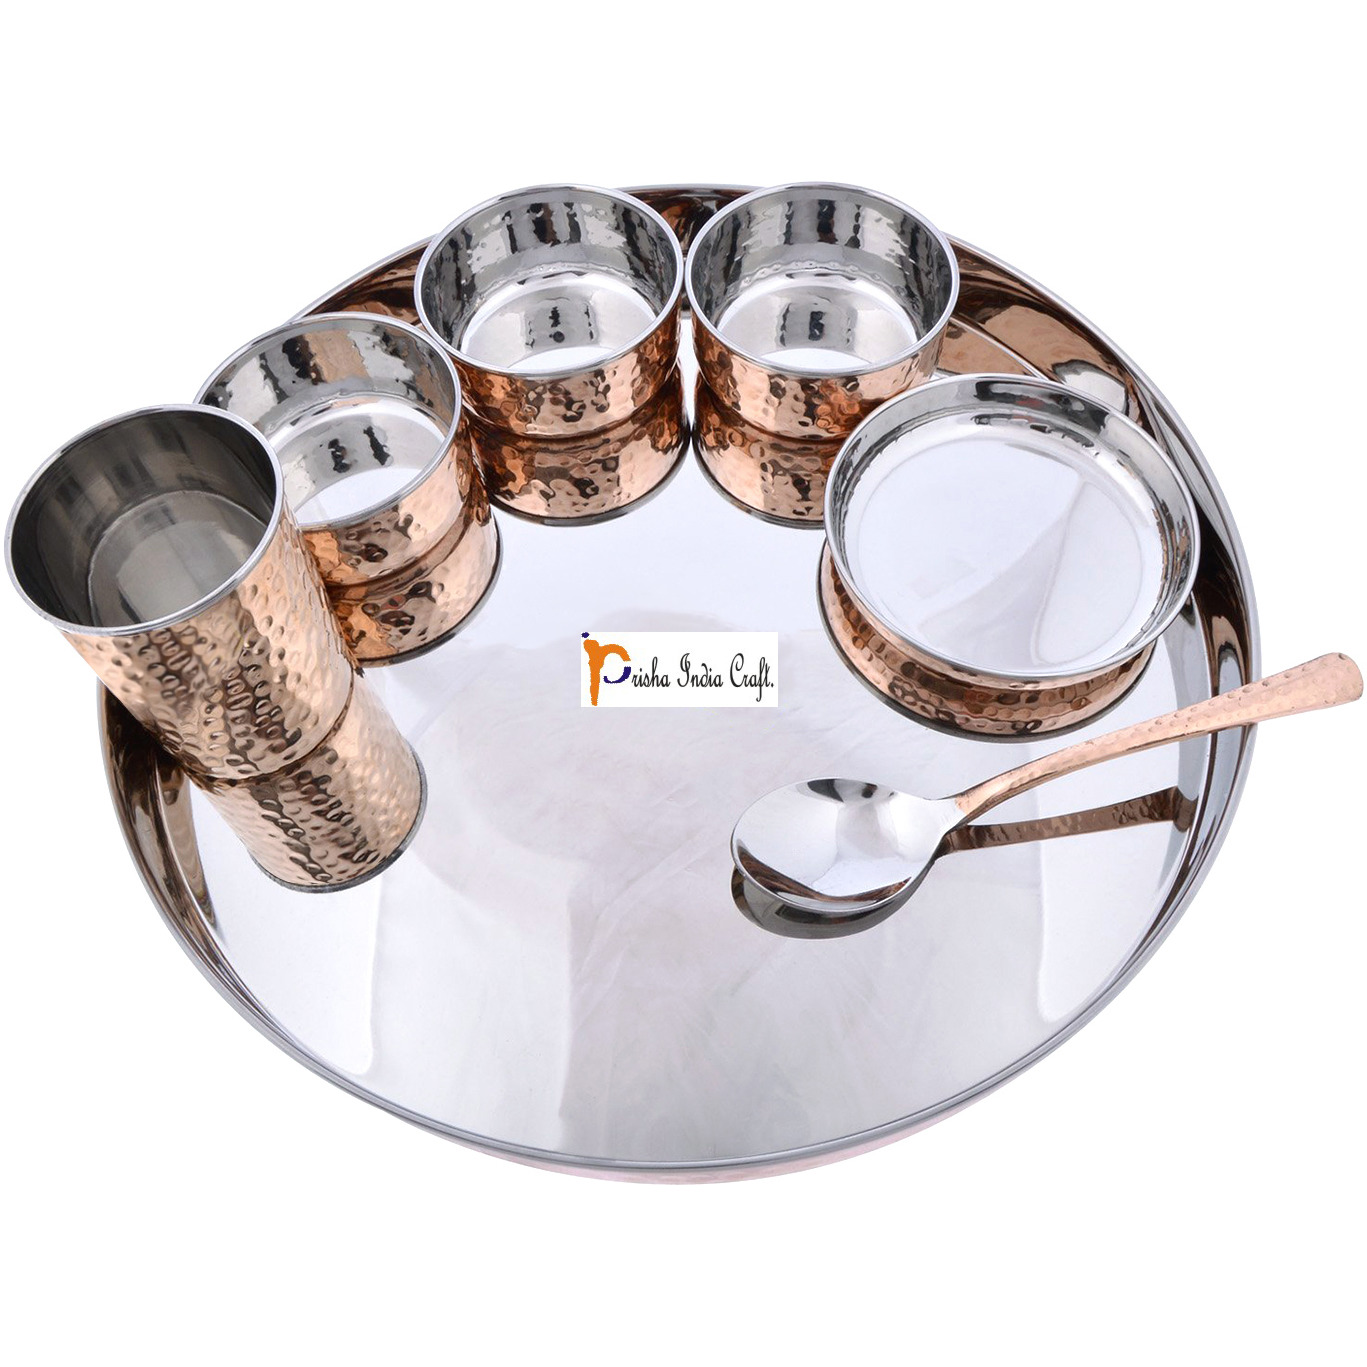 Prisha India Craft B. Set of 2 Dinnerware Traditional Stainless Steel Copper Dinner Set of Thali Plate, Bowls, Glass and Spoon, Dia 13  With 1 Stainless Steel Copper Pitcher Jug - Christmas Gift